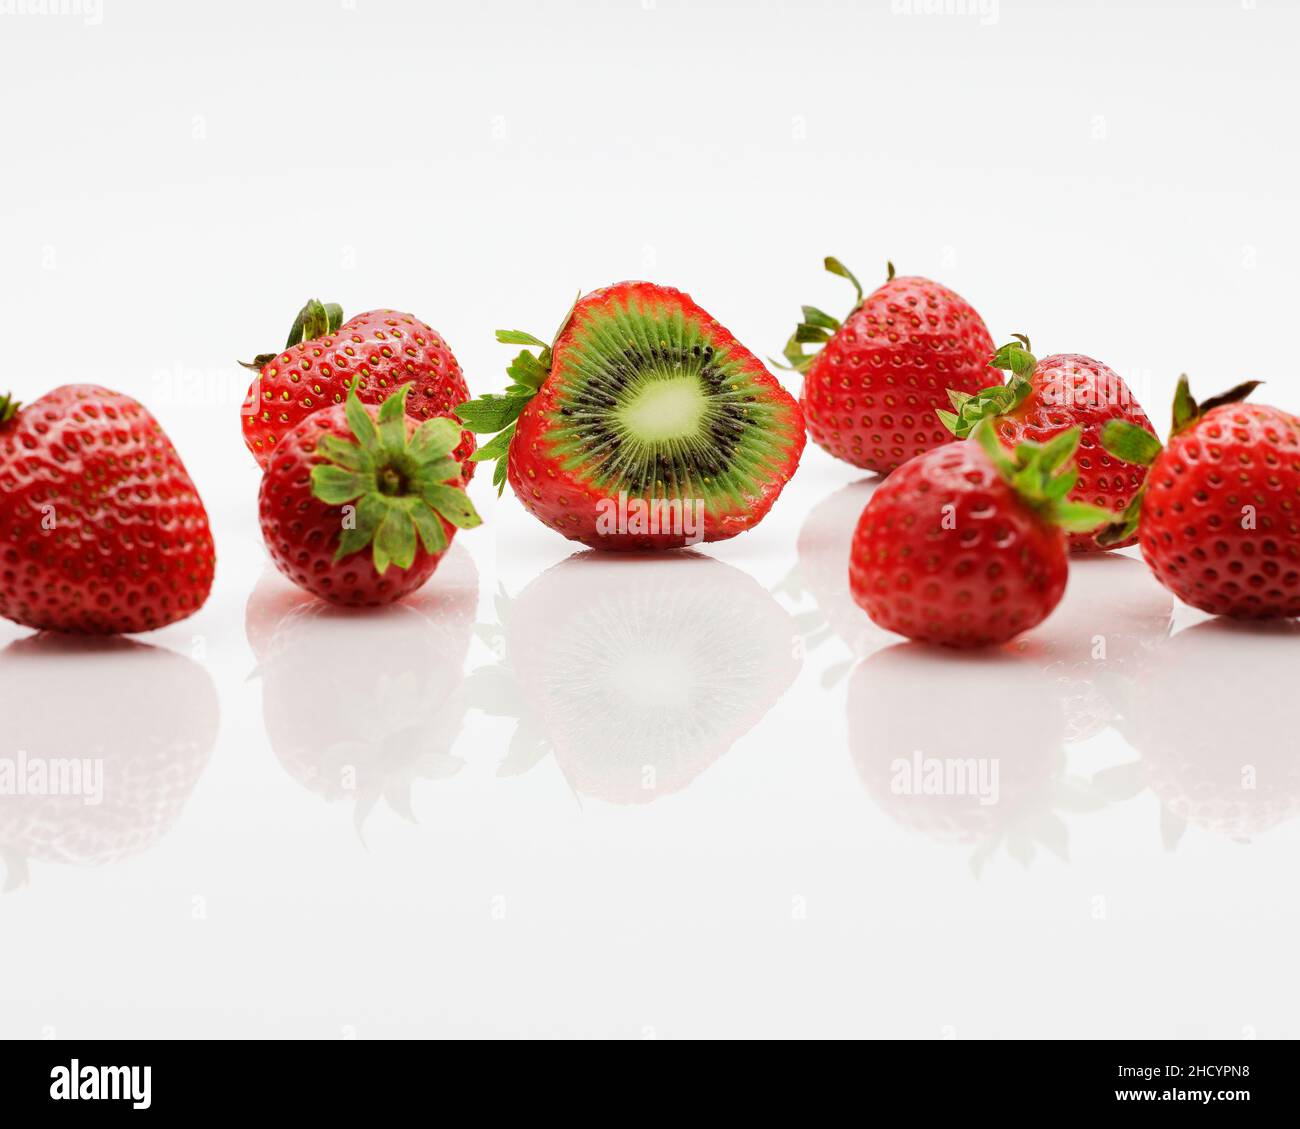 A hybrid fruit of strawberries and kiwi fruit, cut open to expose the unusual flesh of the fruit. Stock Photo